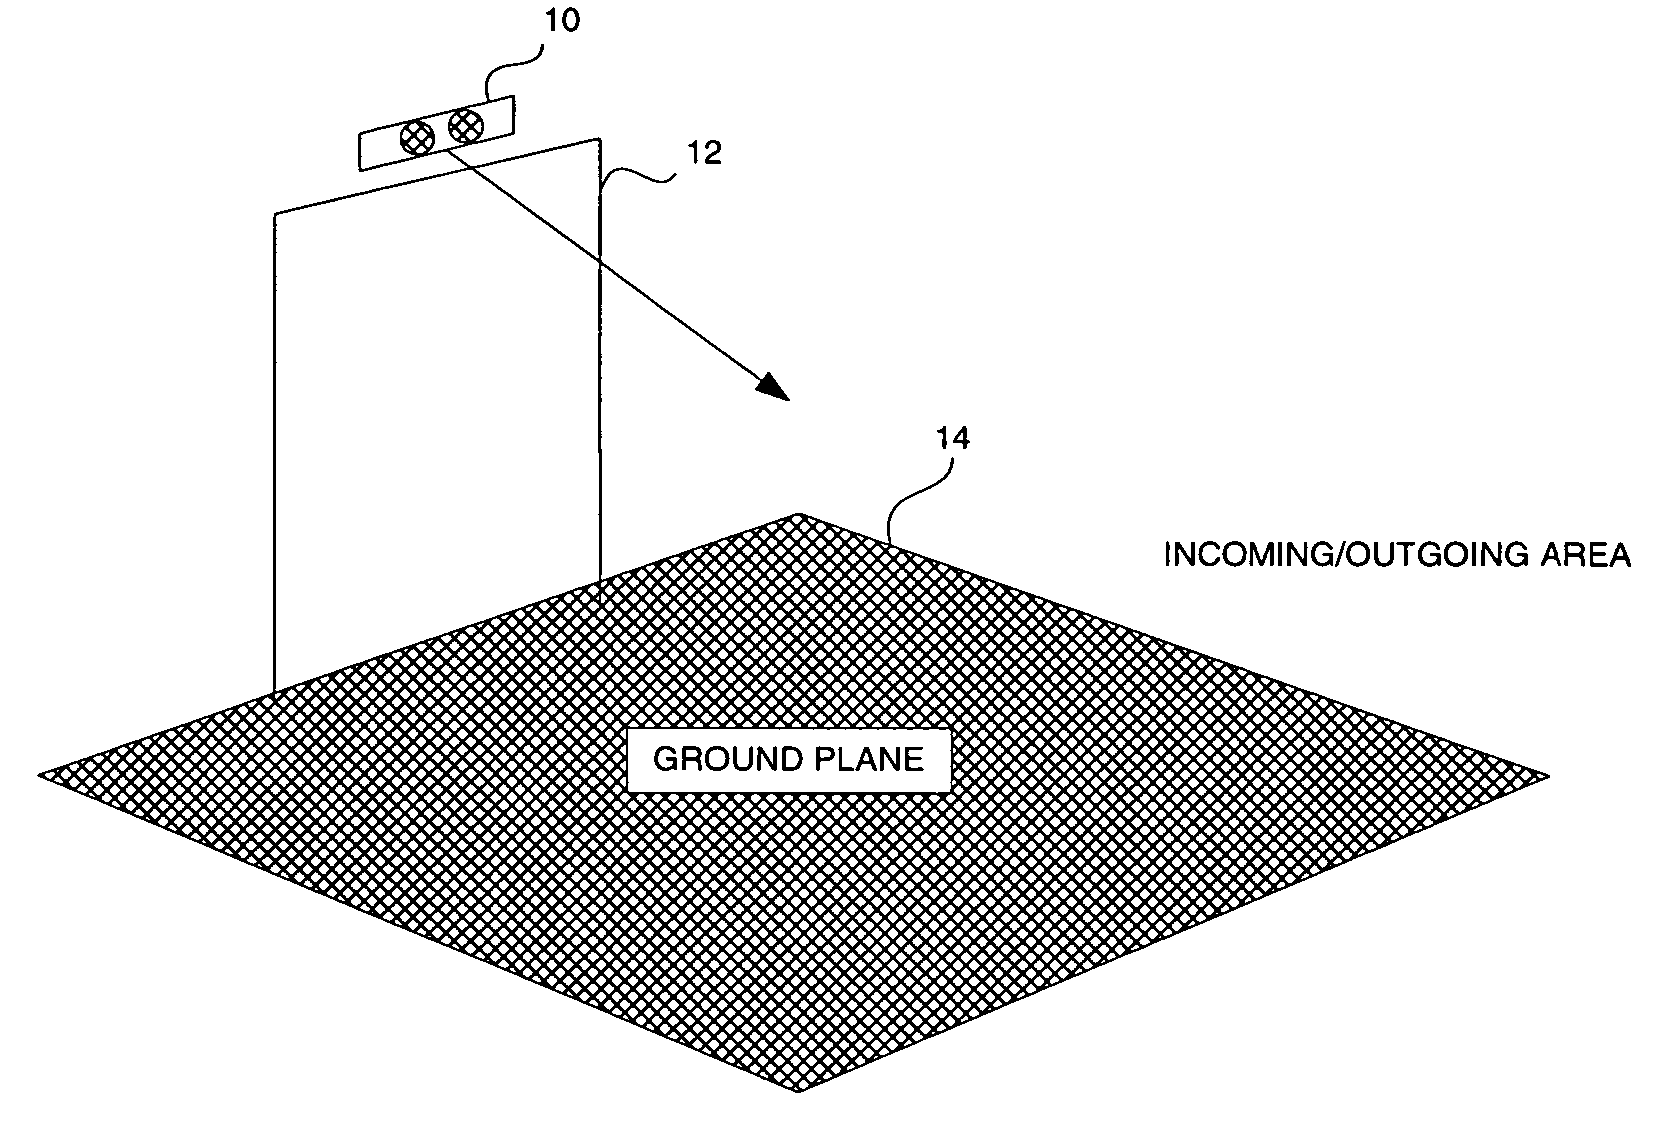 Method and apparatus for monitoring a passageway using 3D images